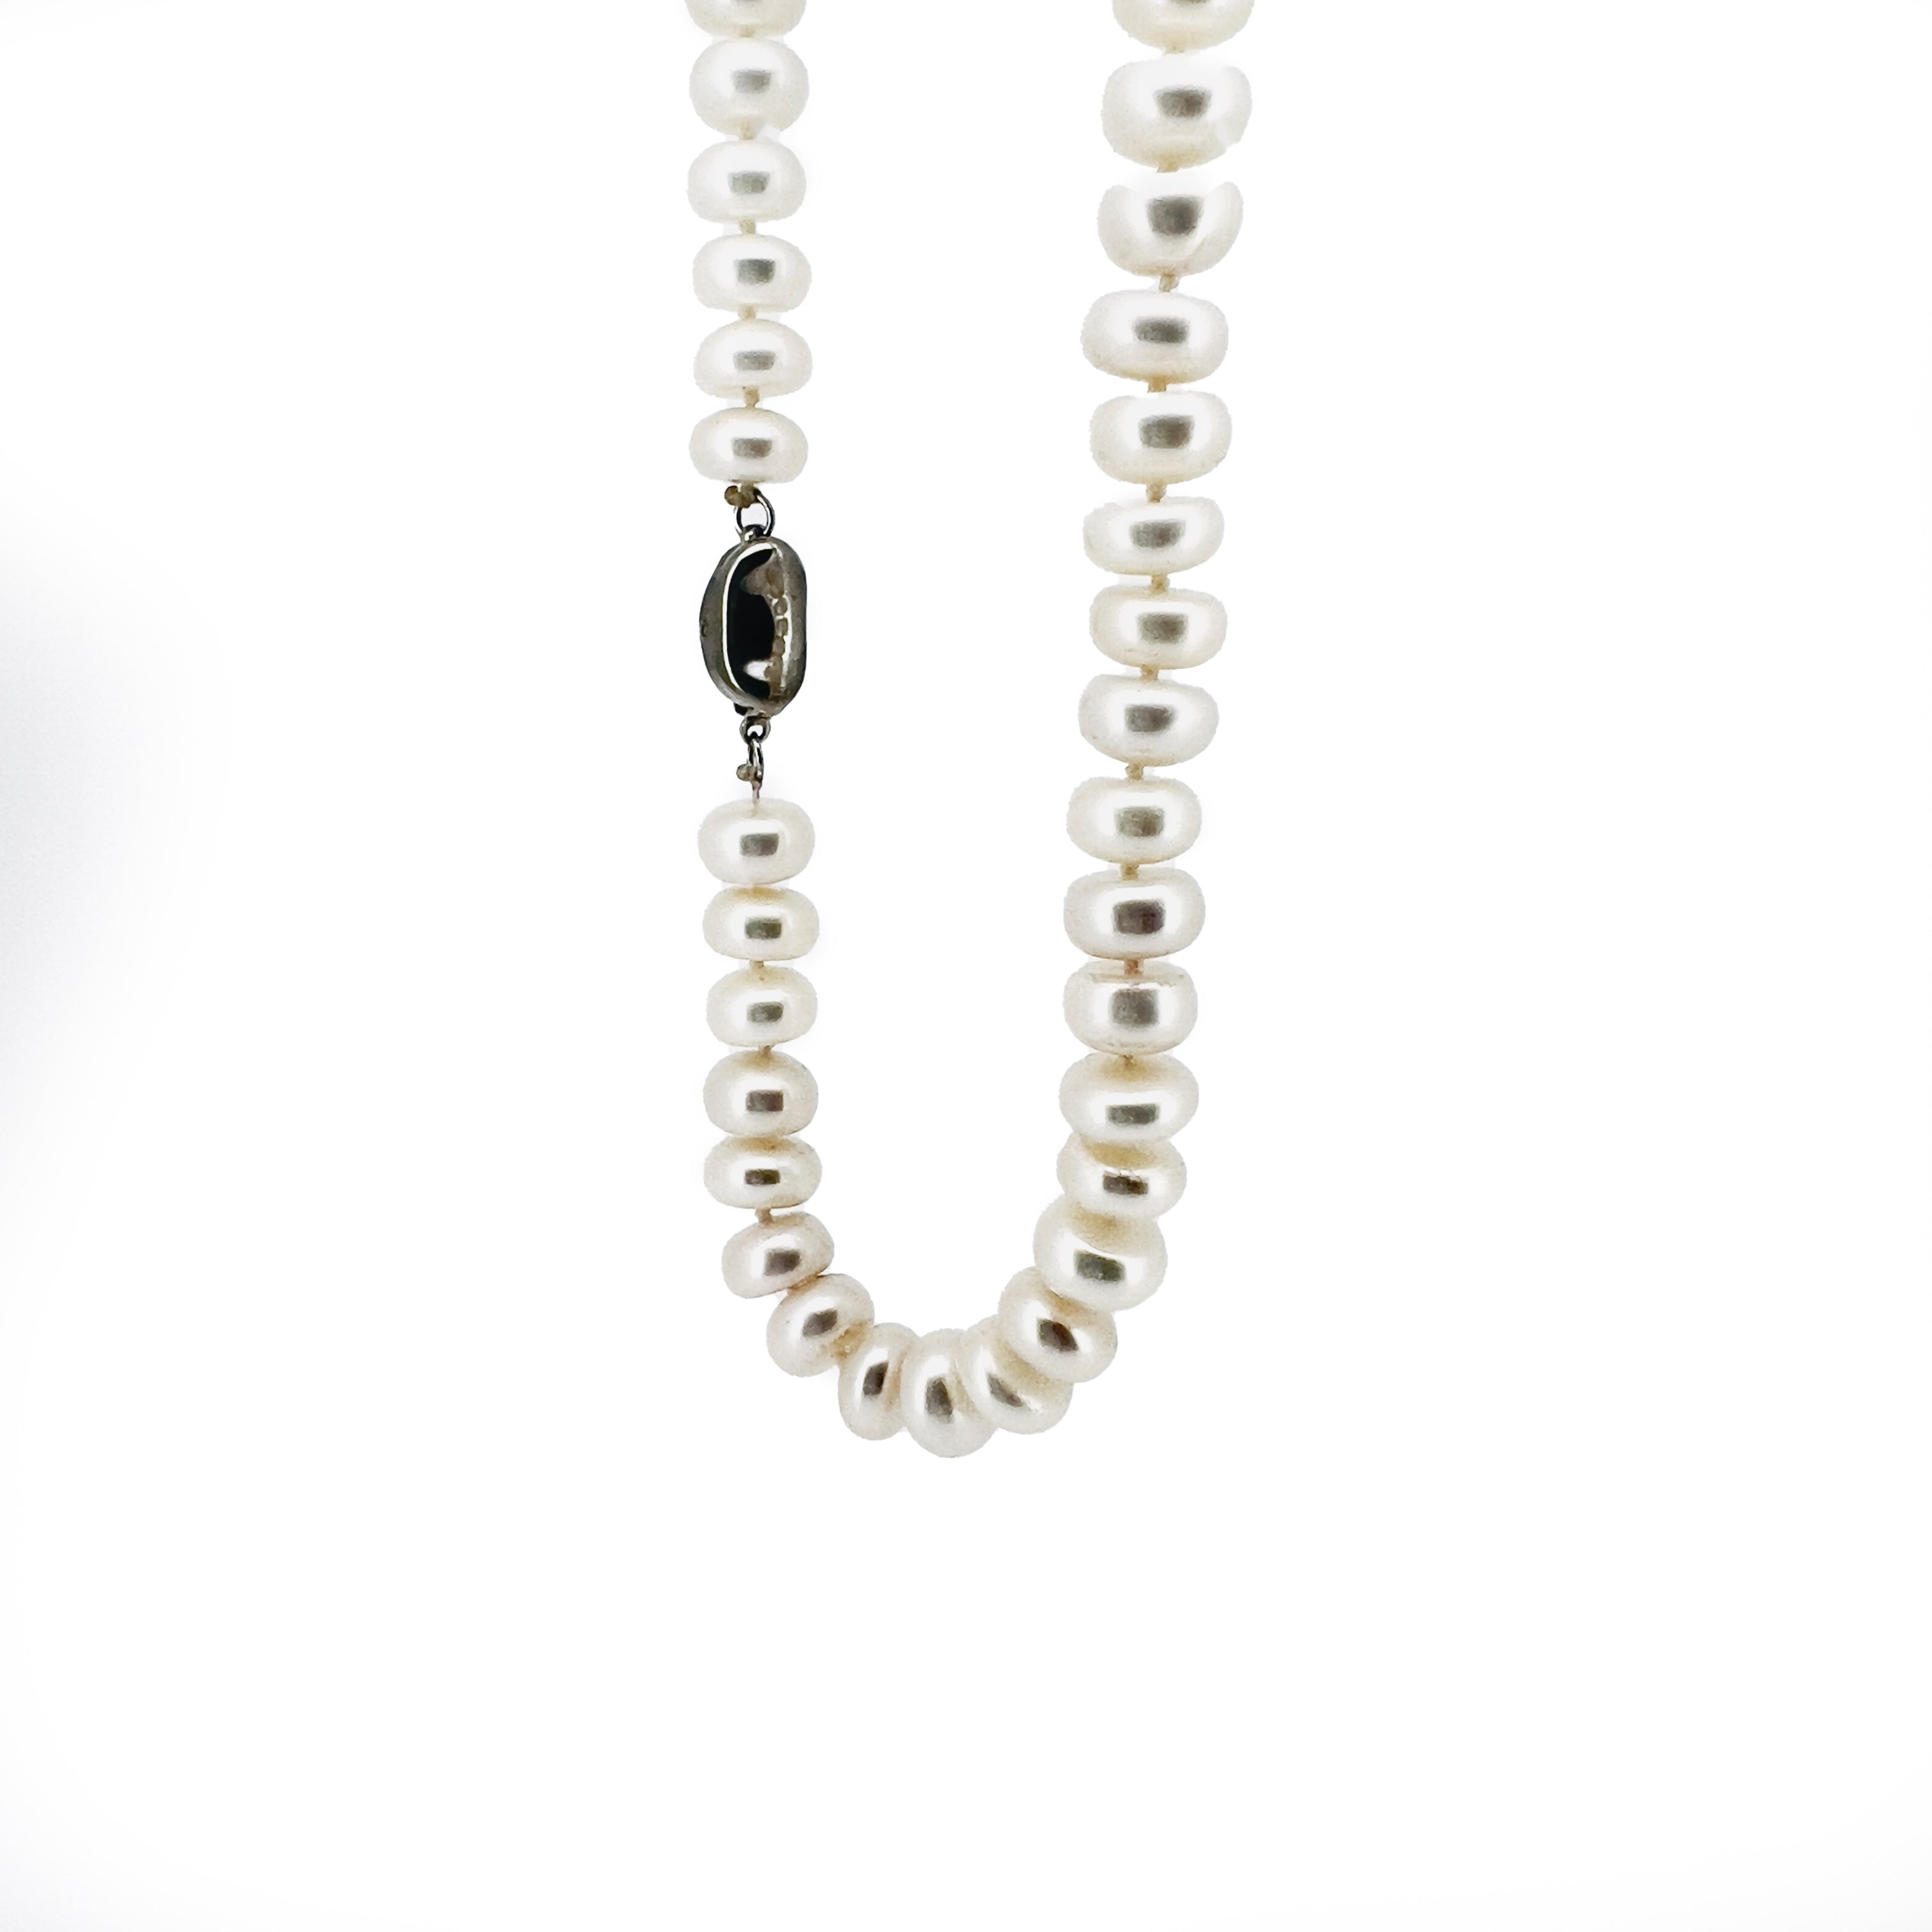 Antiago Natural Freshwater Pearls Strand Necklace